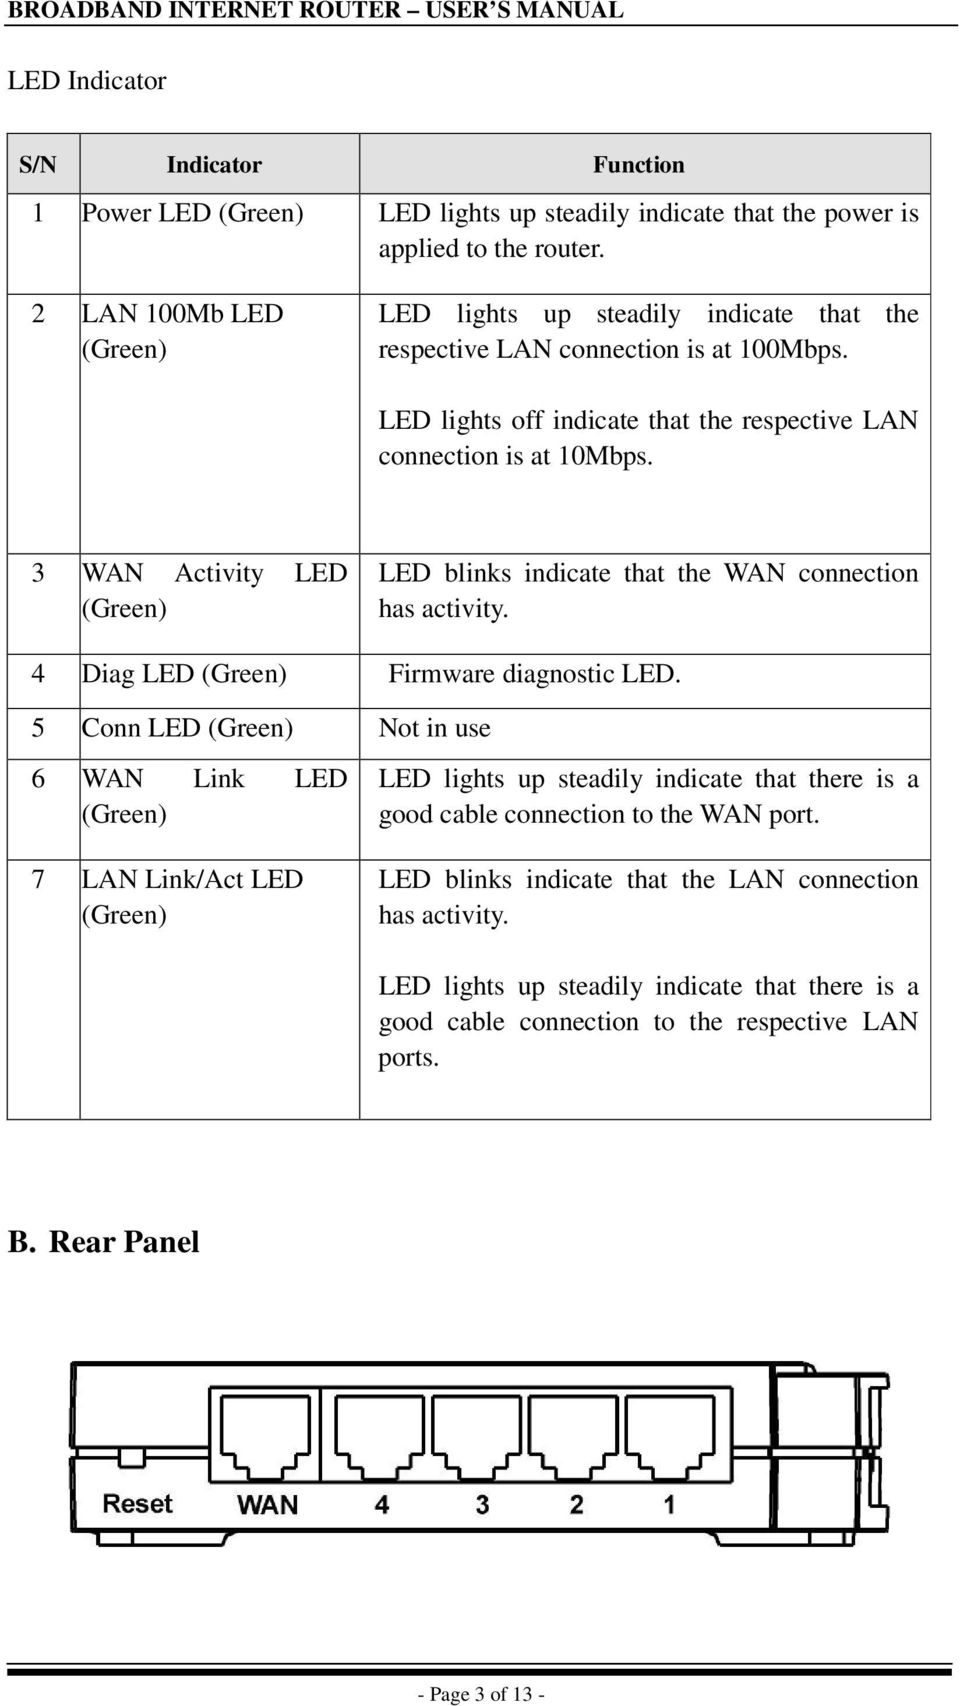 3 WAN Activity LED (Green) LED blinks indicate that the WAN connection has activity. 4 Diag LED (Green) Firmware diagnostic LED.